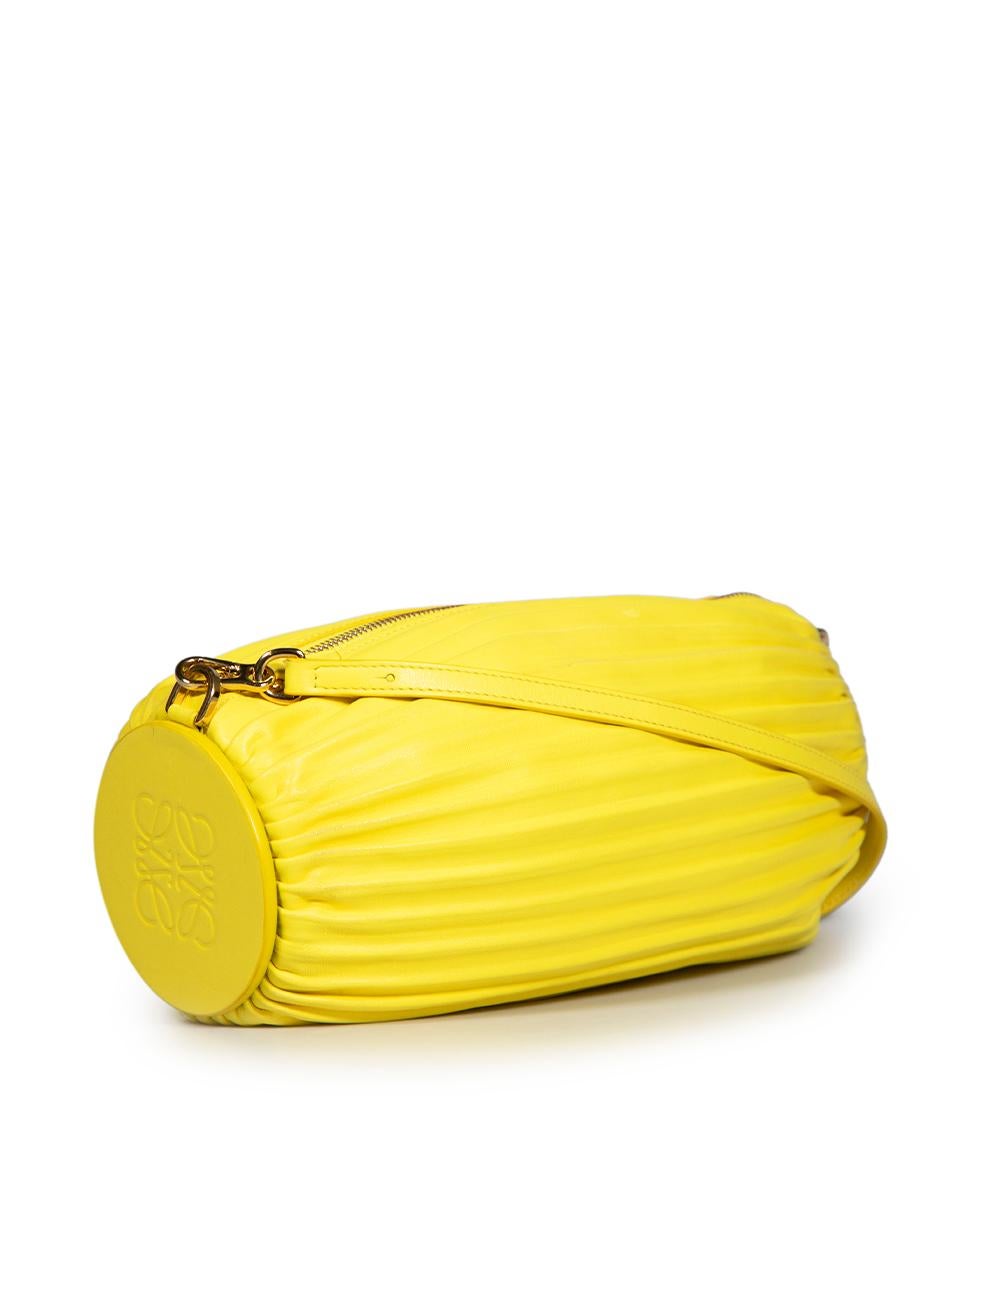 CONDITION is Very good. Minimal wear to bag is evident. Minimal wear to the leather exterior with darkening and discoloured marks on this used Loewe designer resale item.
 
 Details
 Yellow
 Leather
 Convertible shoulder bag and bracelet
 Pleated